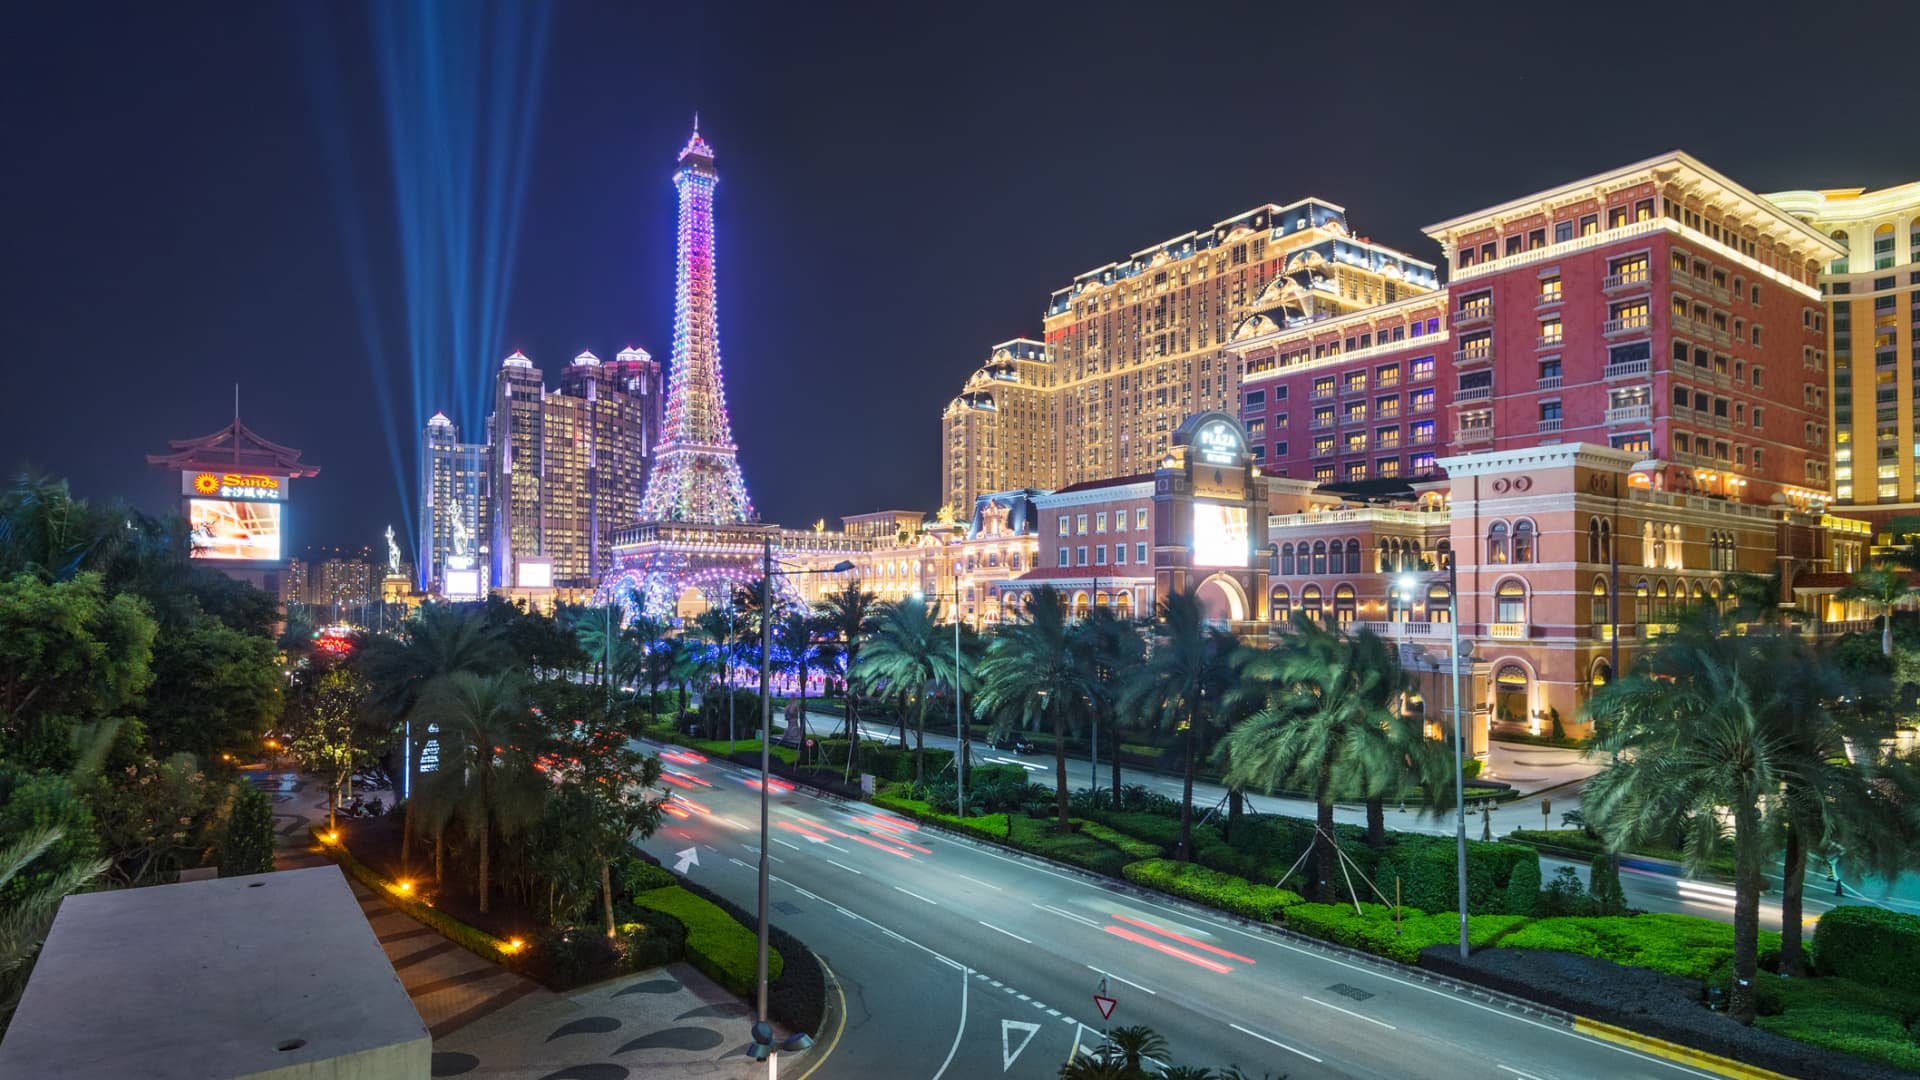 The Cotai Strip is located on the island of Cotai, a portmanteau reflecting the reclamation project that joined the two Macao islands of Coloane and Taipa in 2005.